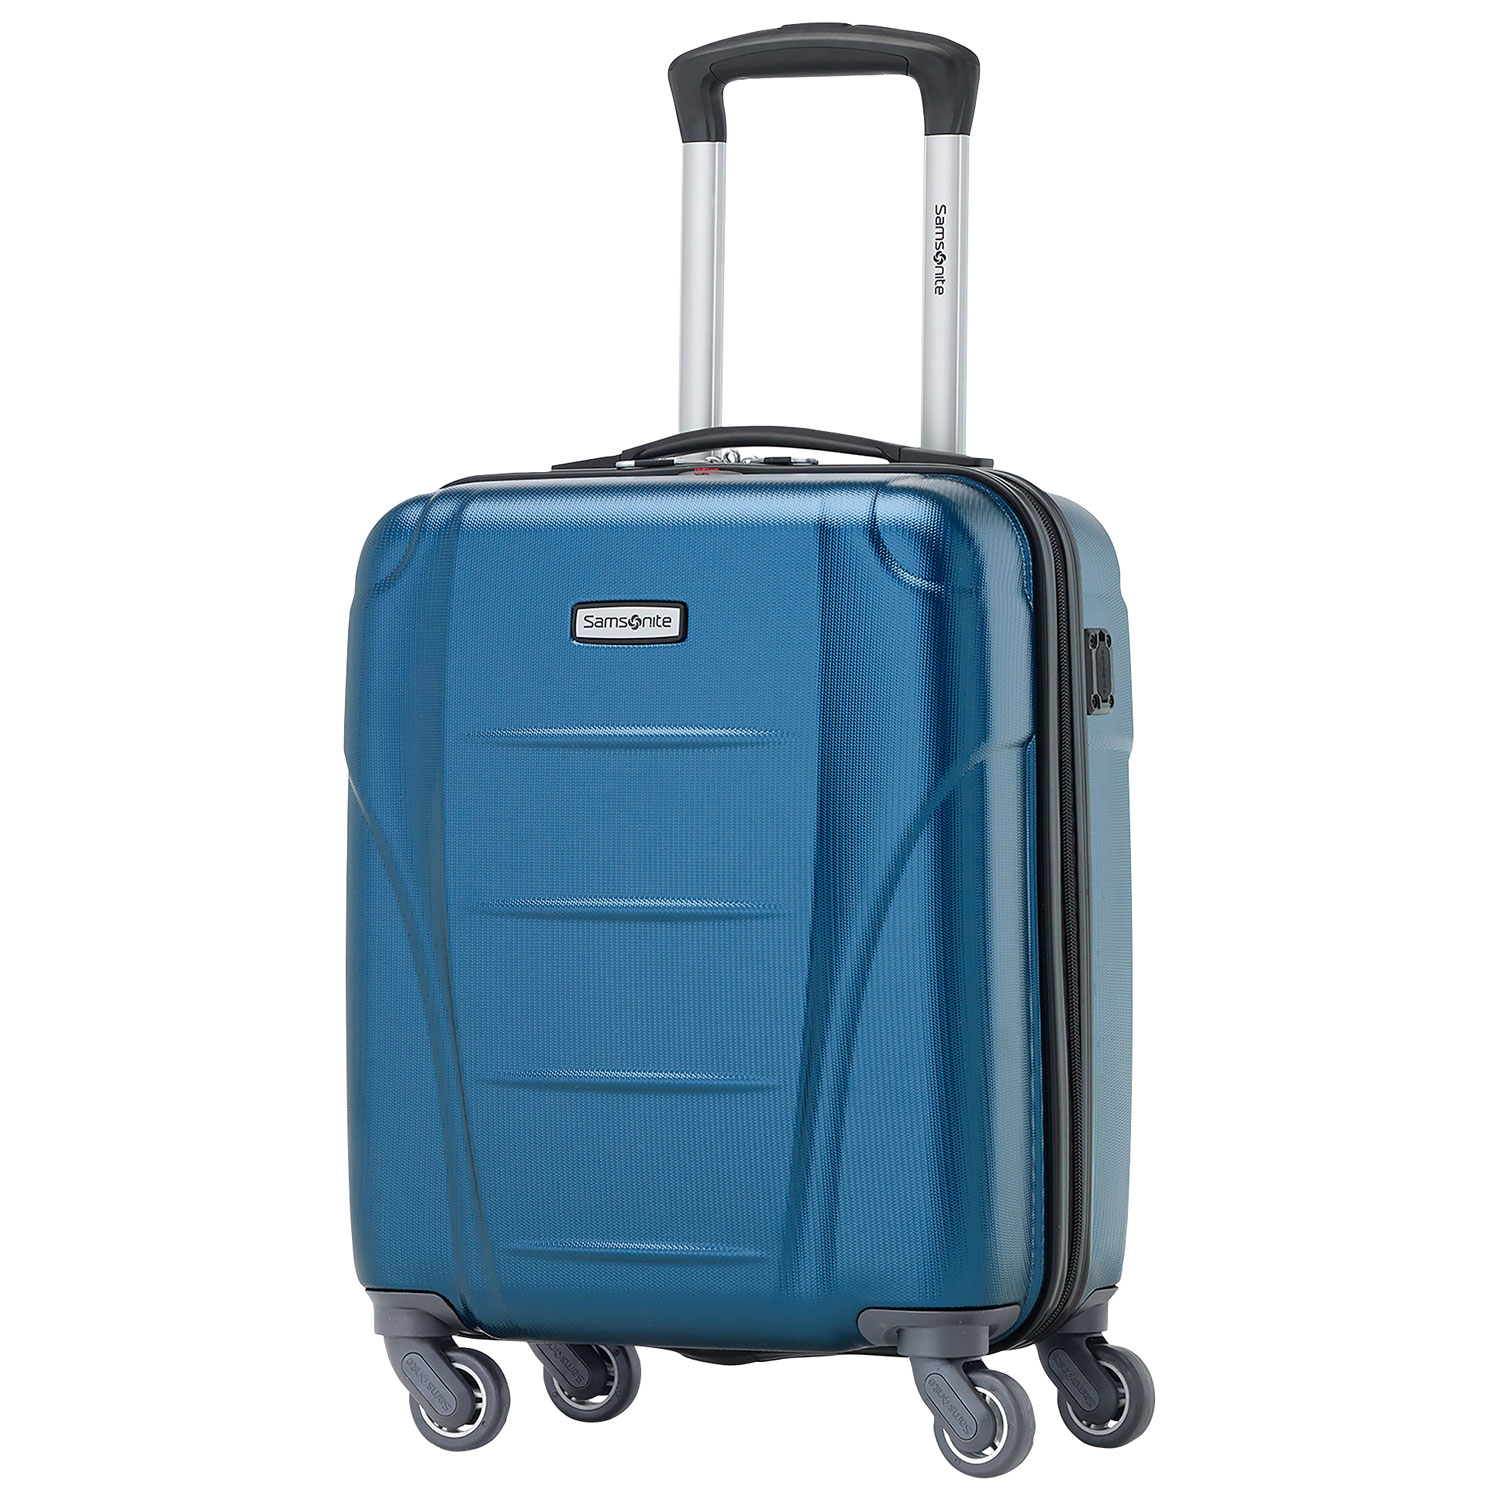 Samsonite Winfield NXT 18.25" Hard Side Carry-On Luggage - Blue